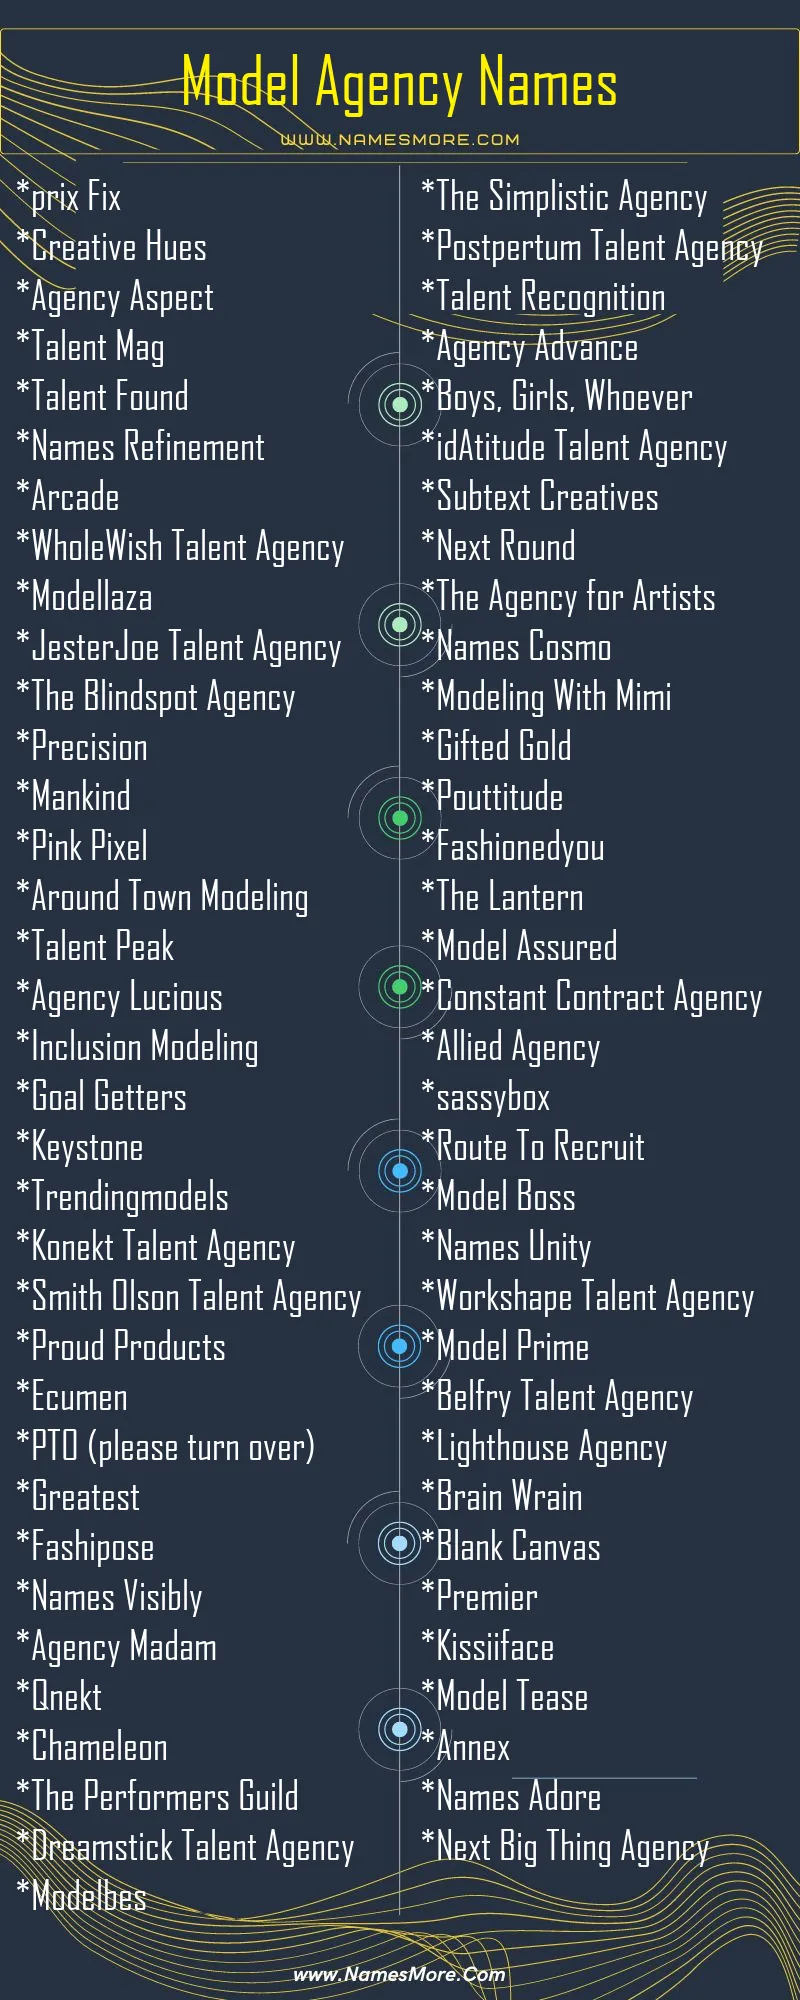 Model Agency Names List Infographic